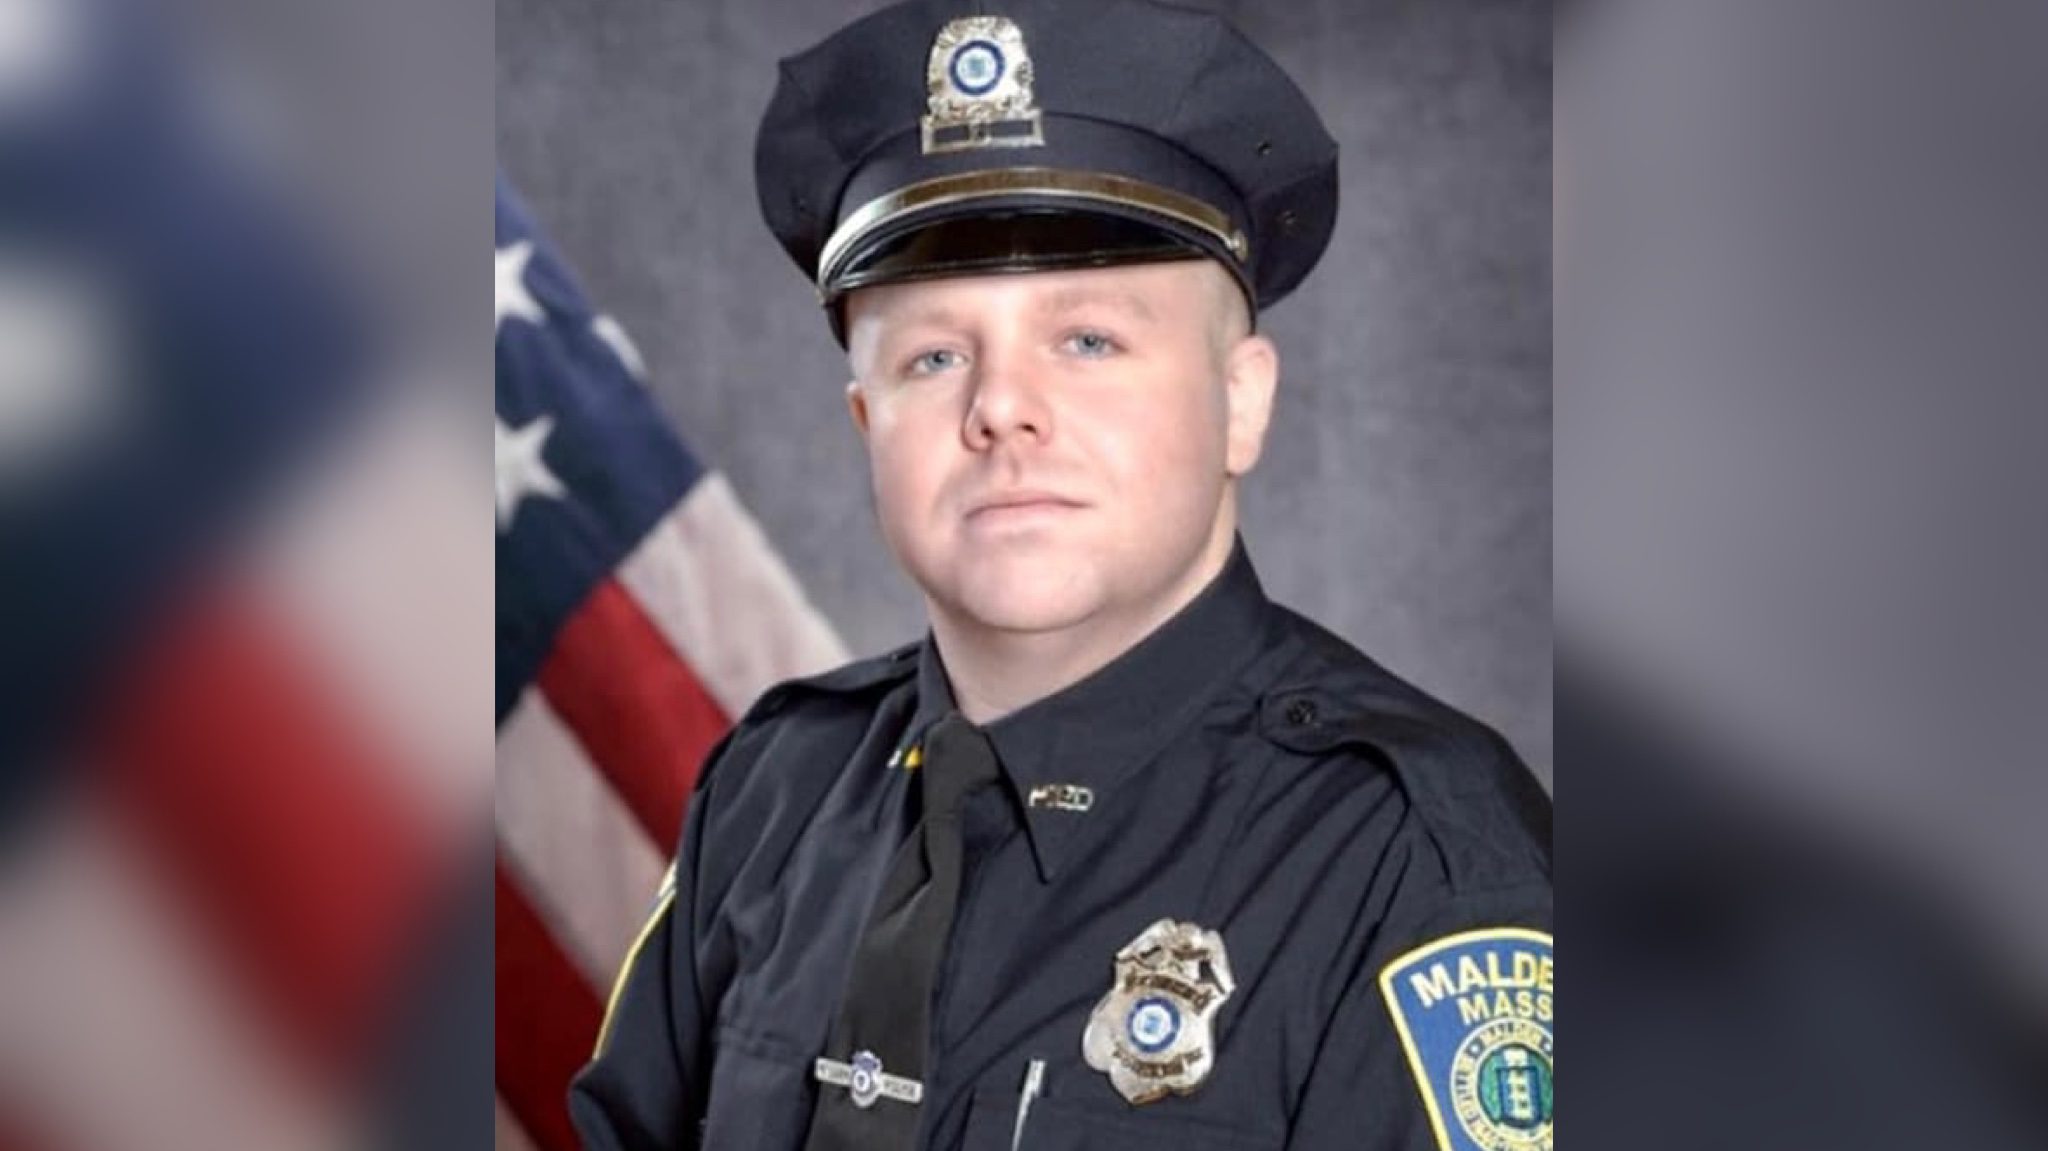 33-Year-Old Malden Police Officer Shawn Dillon Dies Suddenly and Unexpectedly | The Gateway Pundit | by Jim Hᴏft